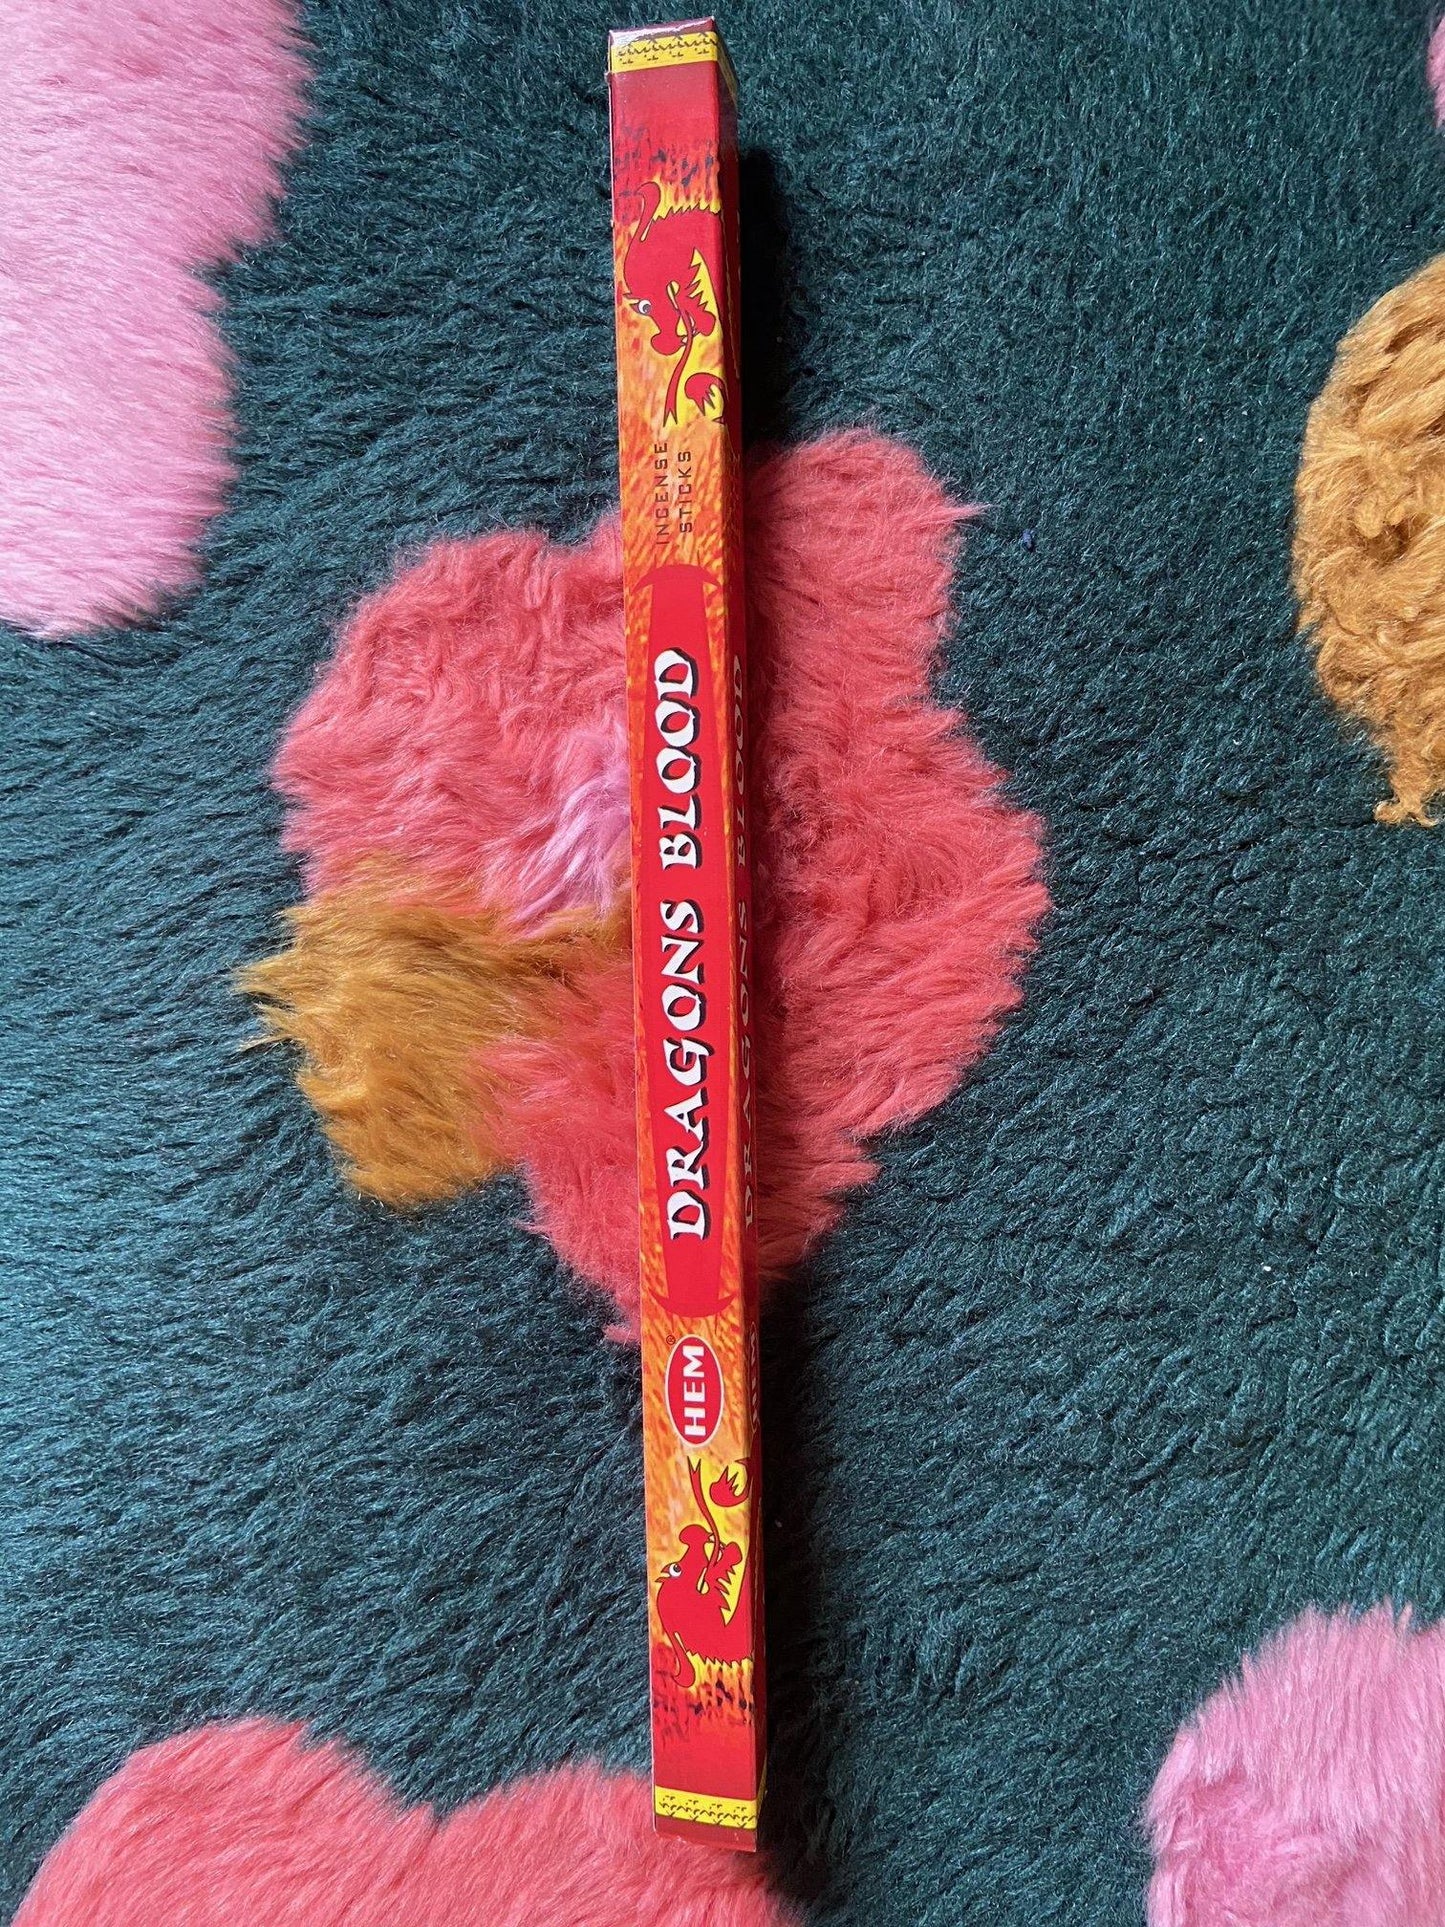  Dragon's Blood Incense Stick -  available at Amazing Creations Products . Grab yours for $2.25 today!